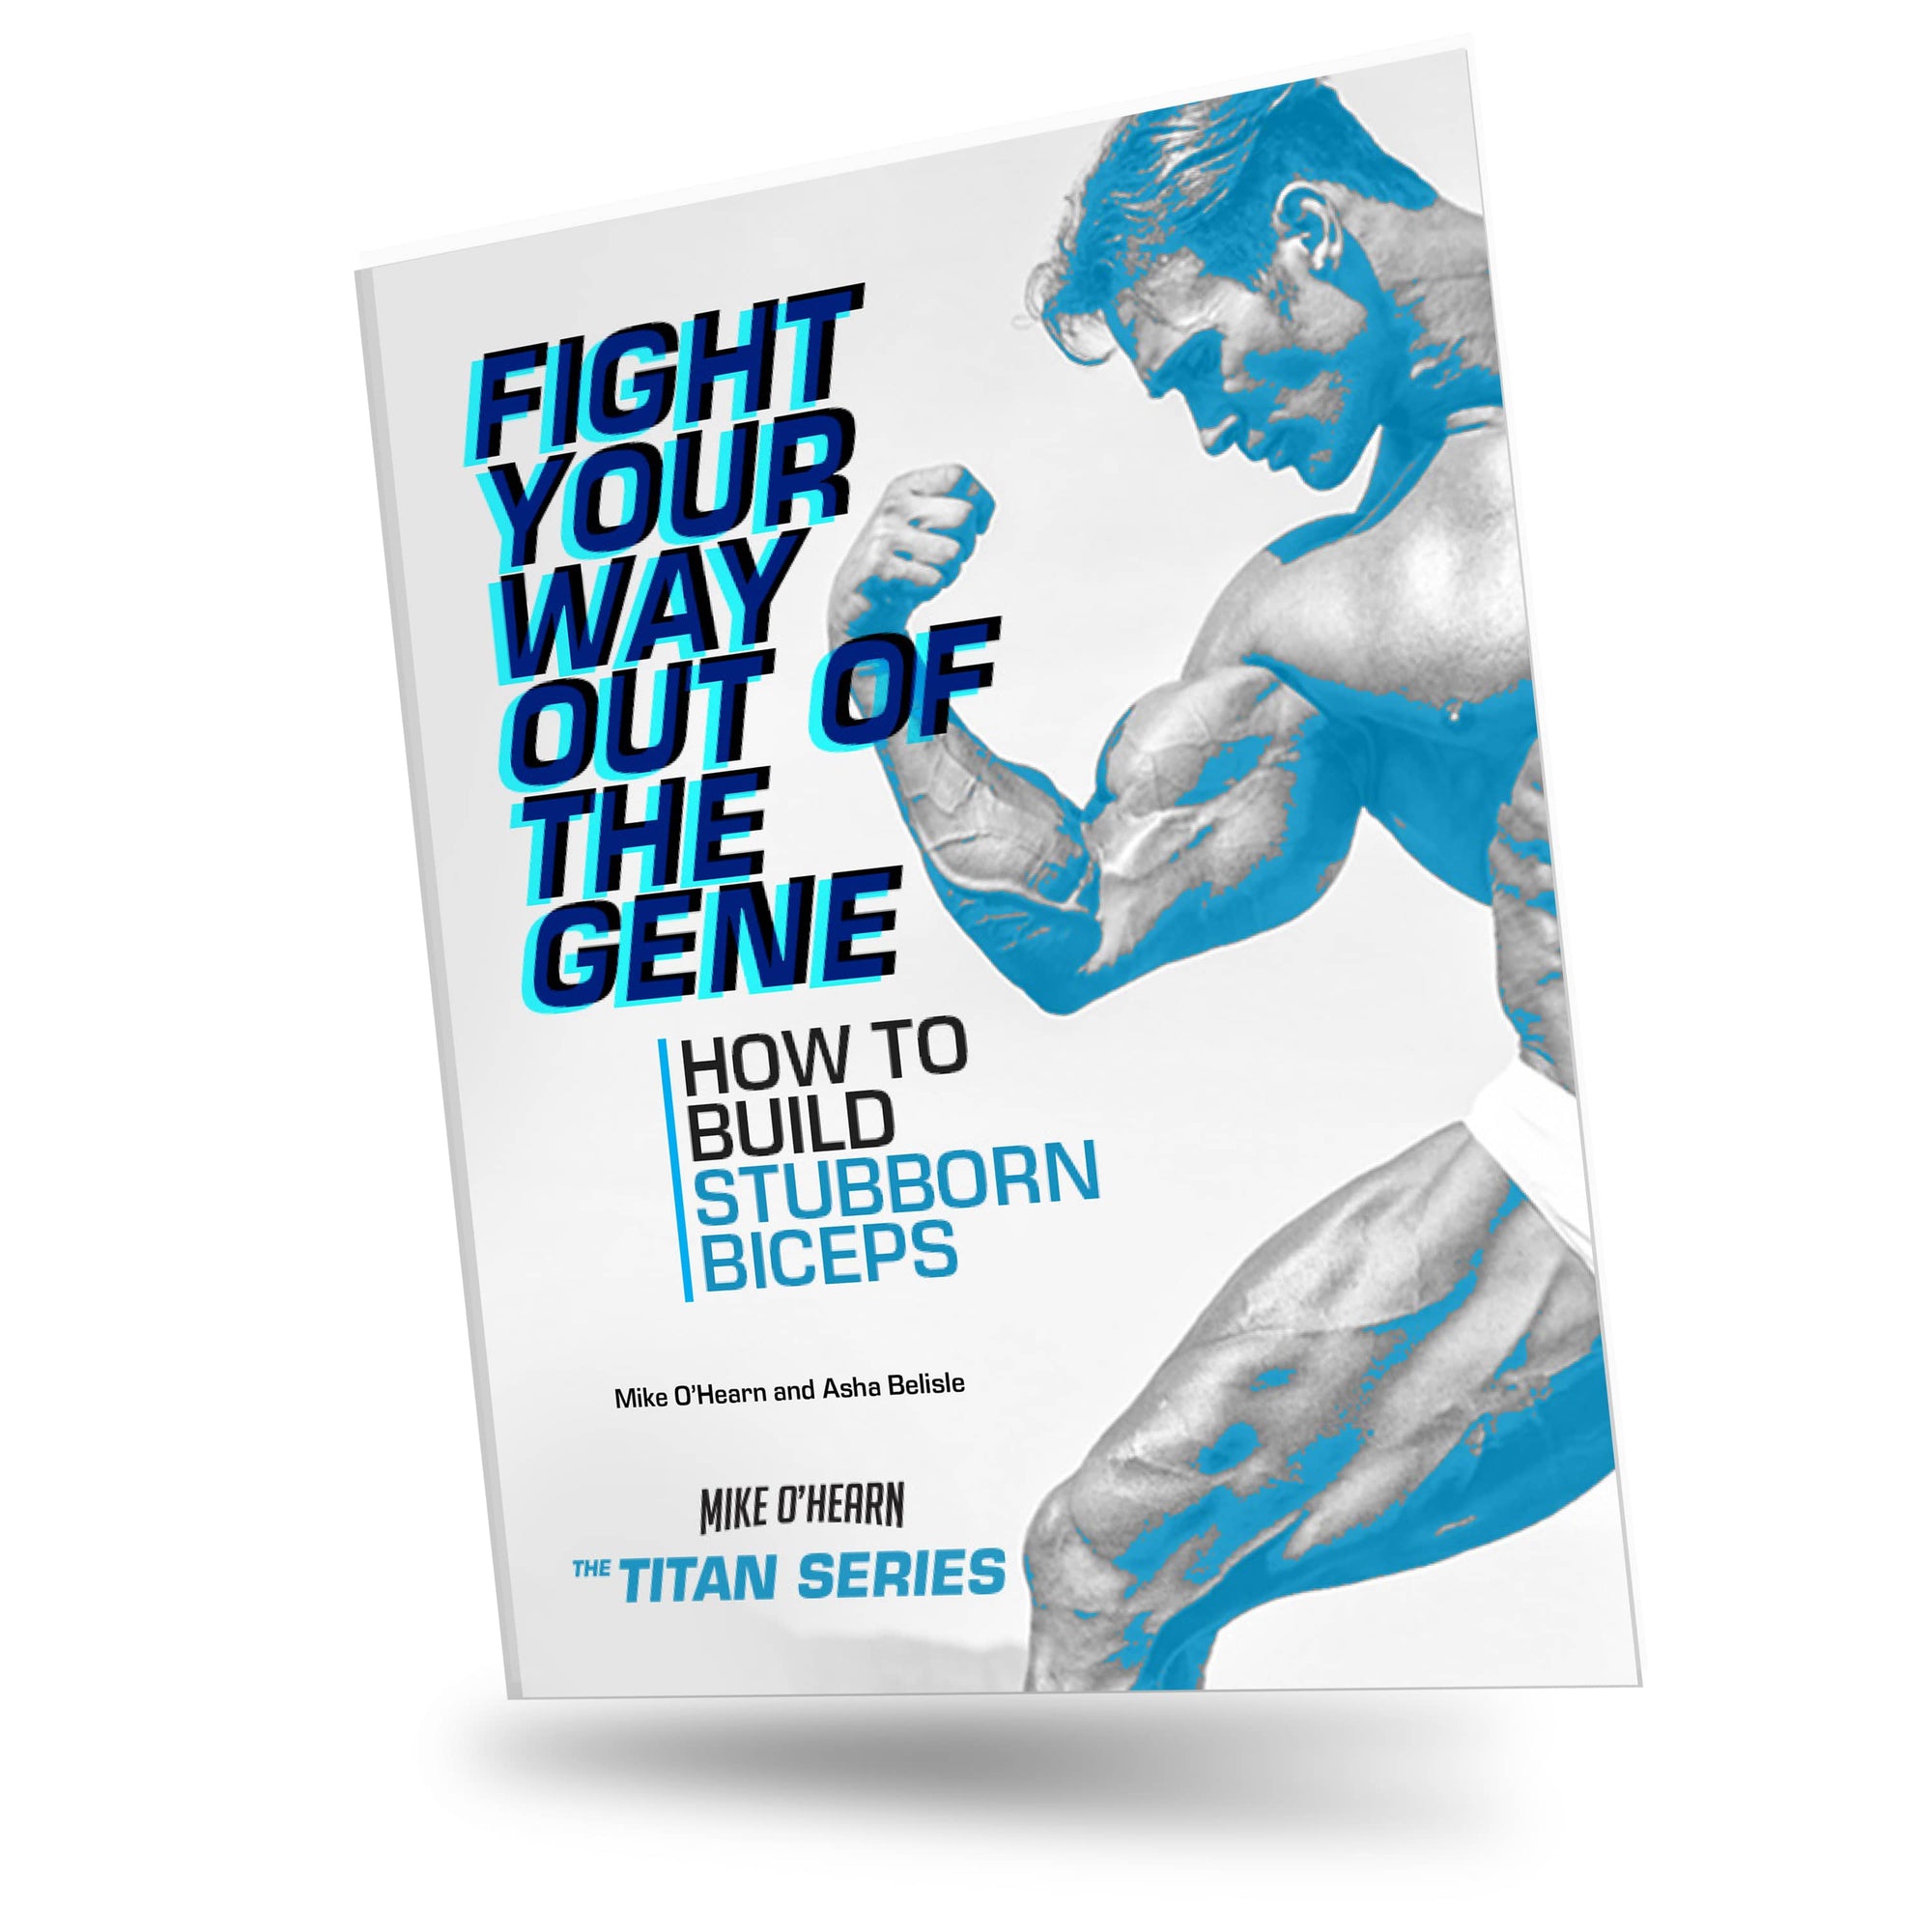 Mike O'Hern Titan Series Book Fight your way out of the gene (how to build stubborn biceps